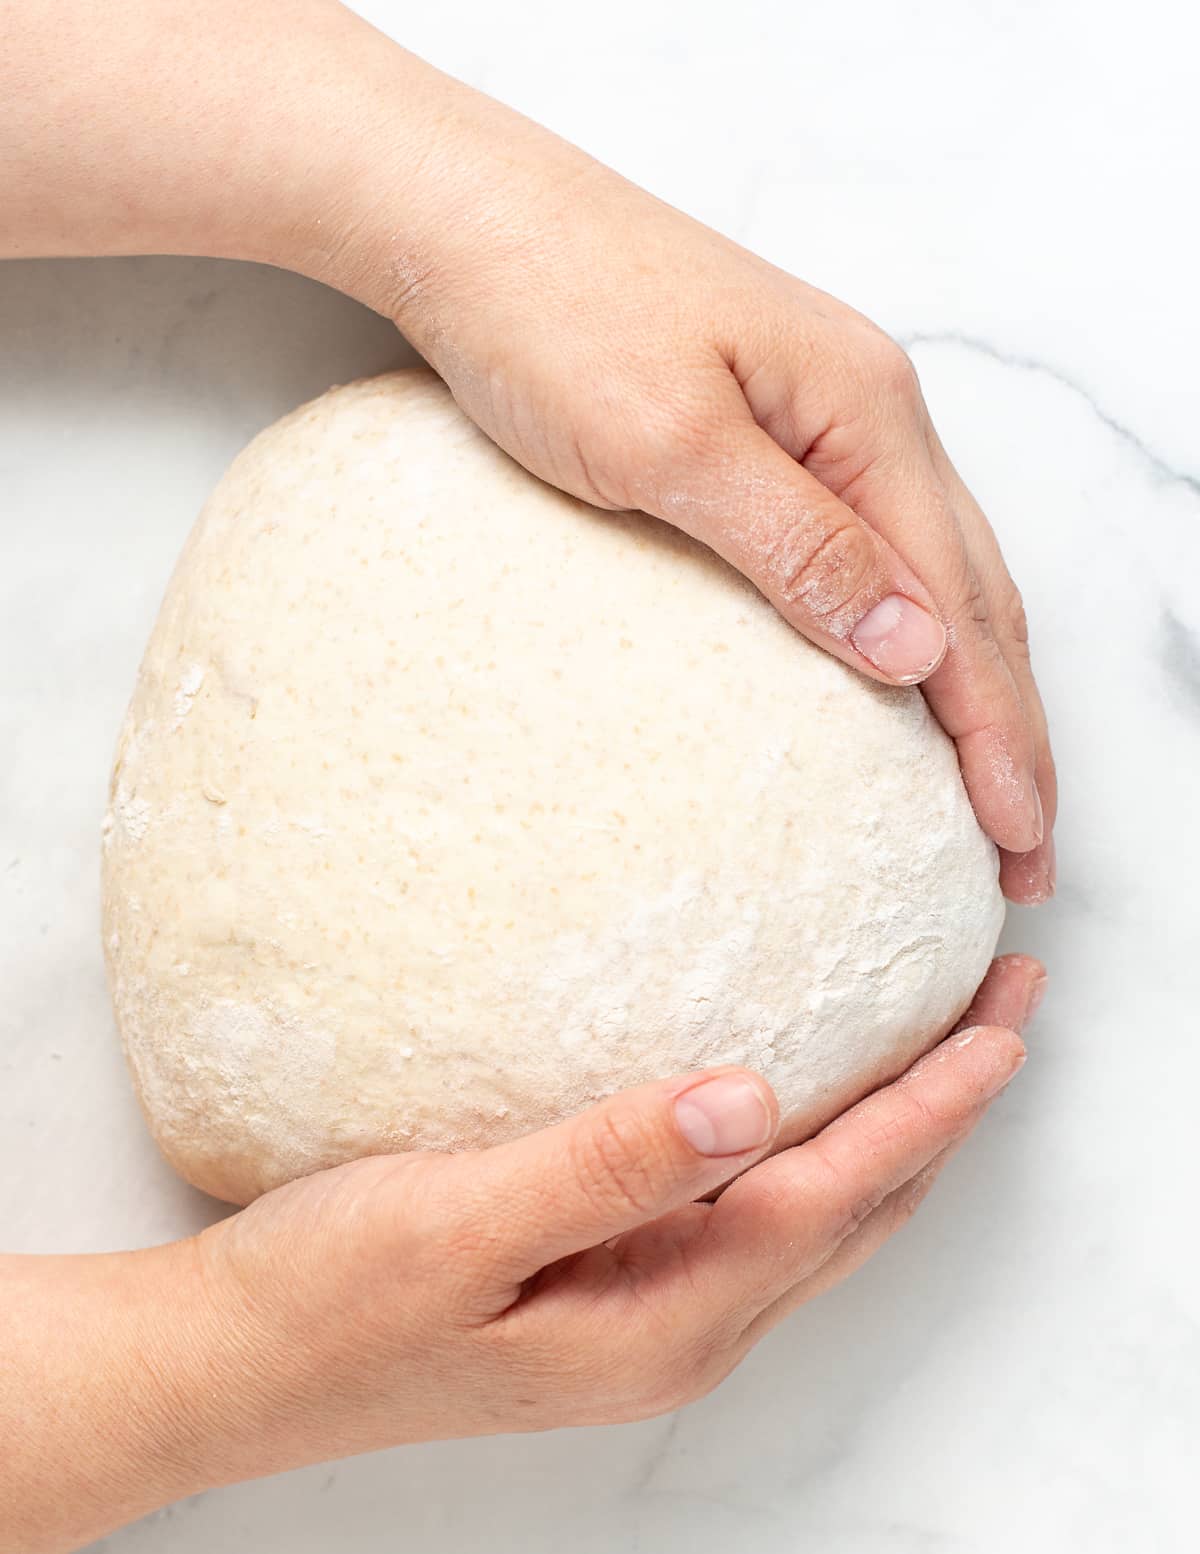 hands shaping a ball of bread dough